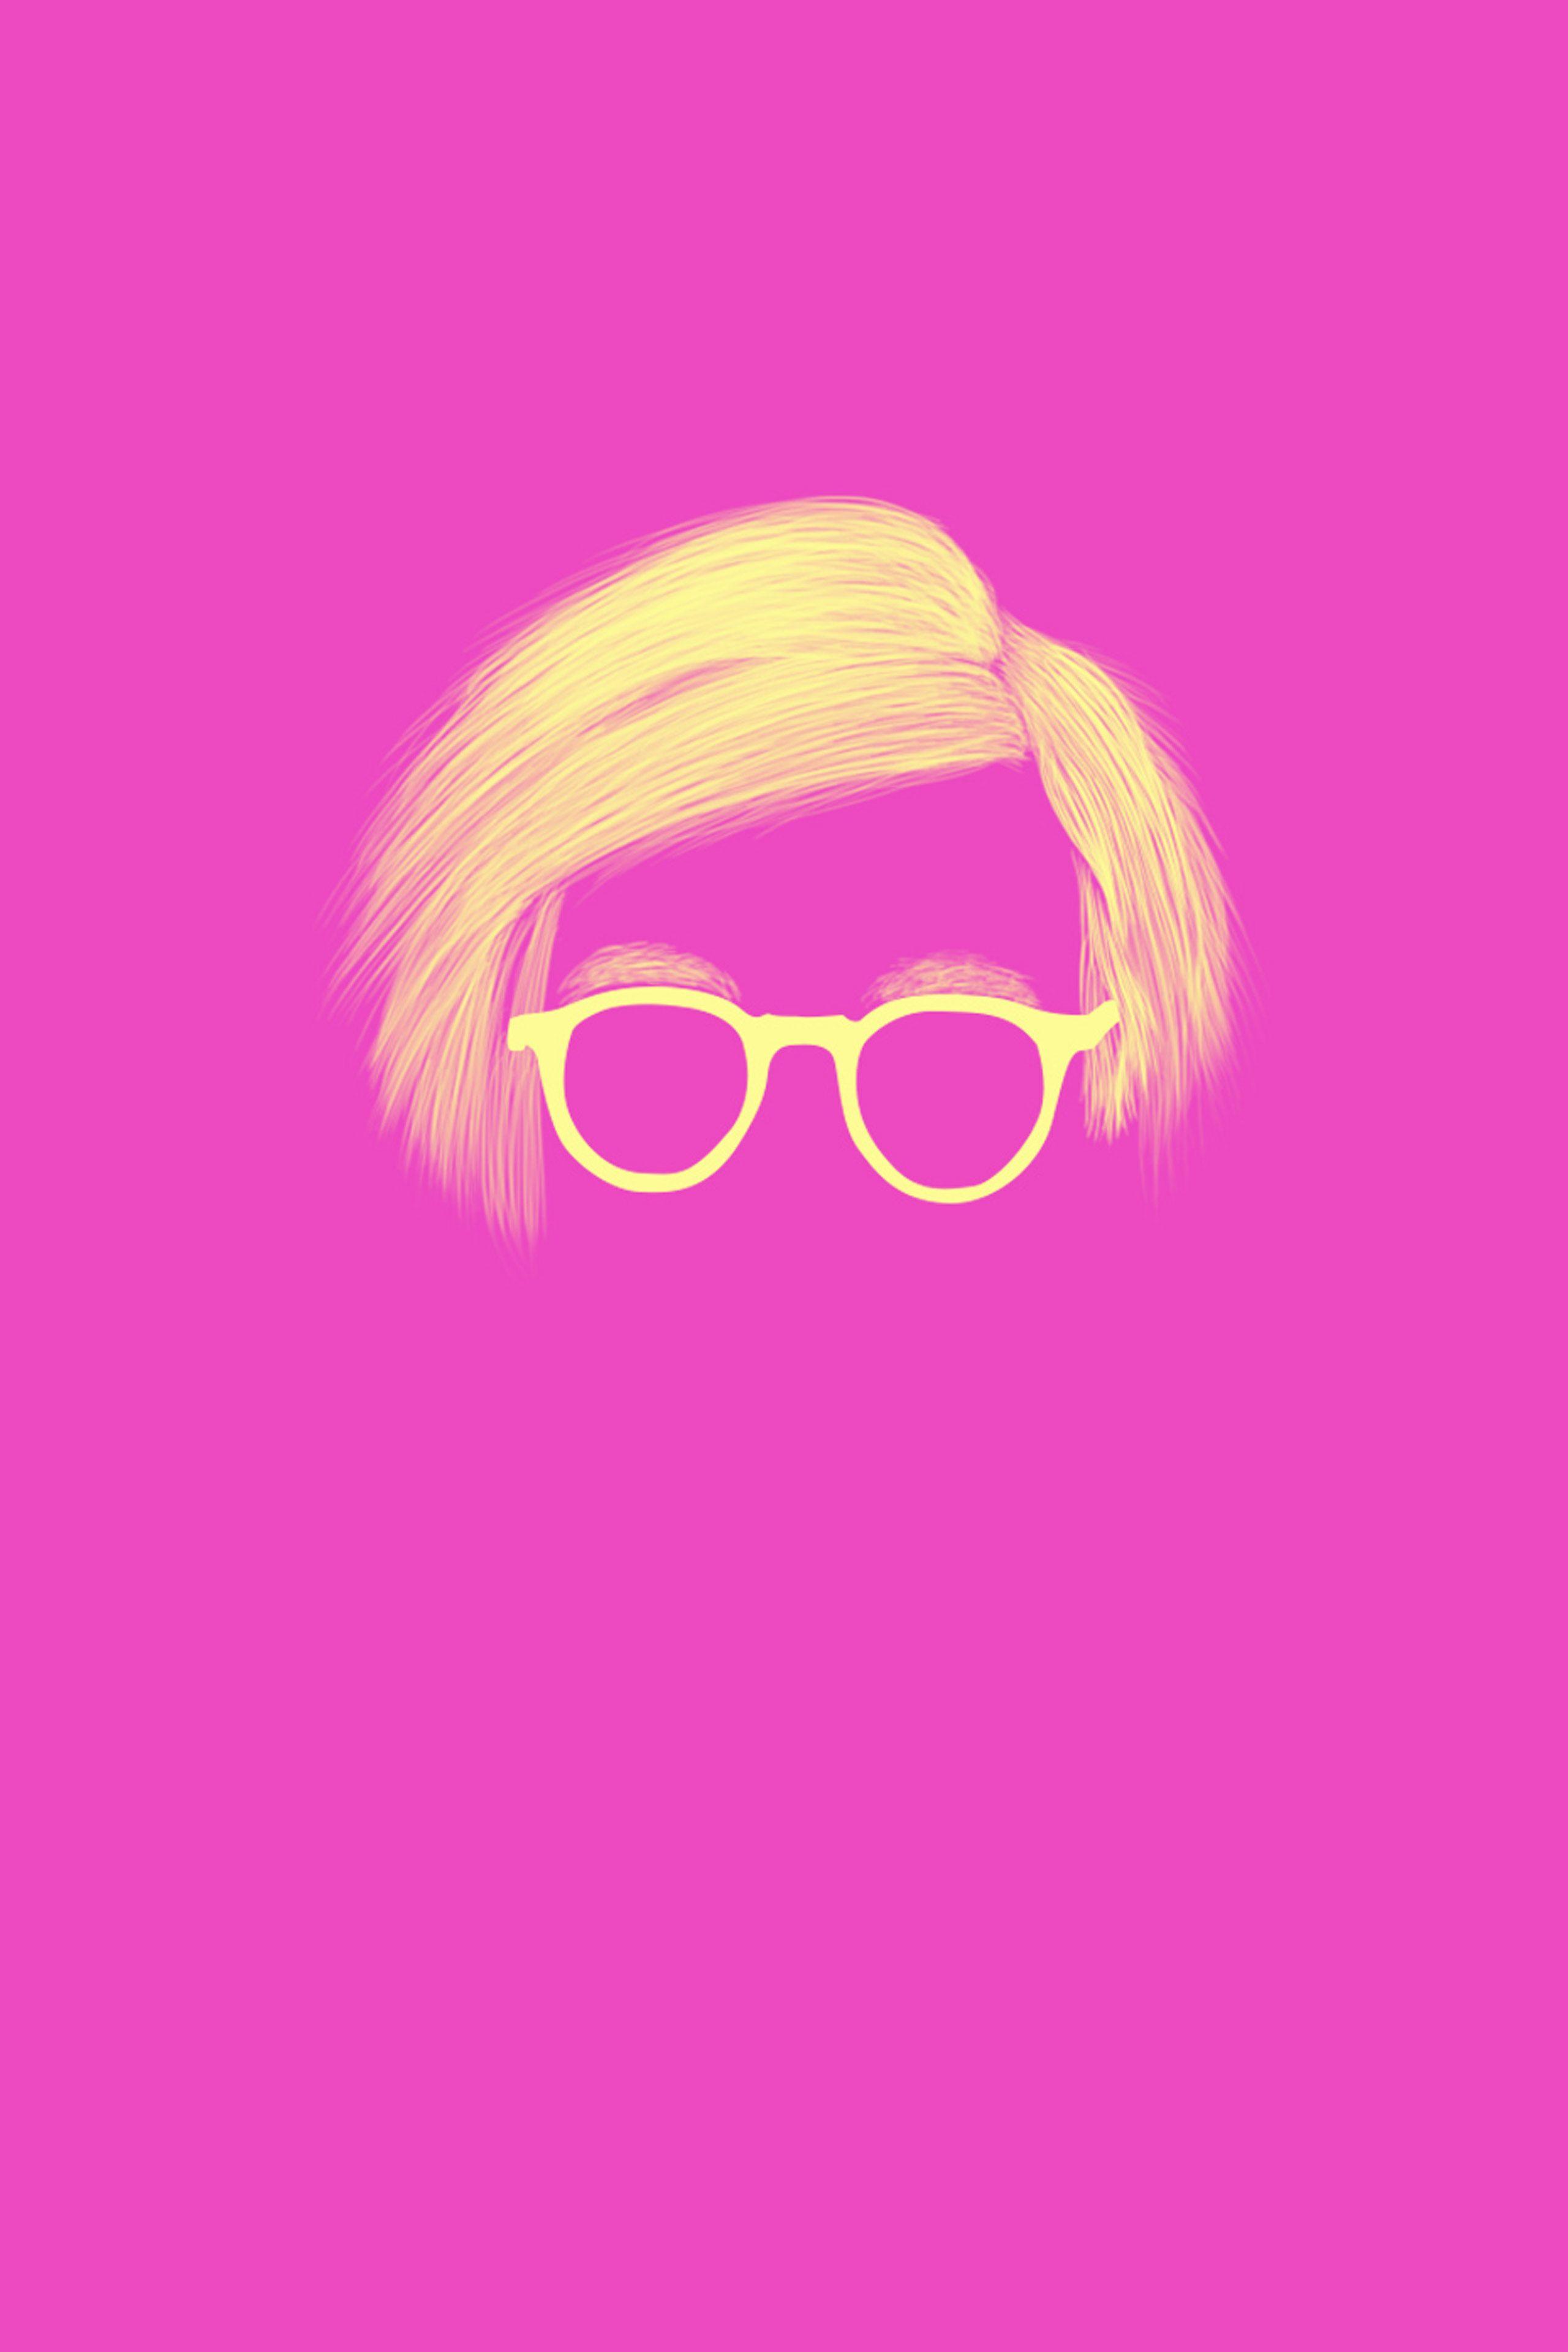 Andy Warhol Iphone Wallpapers Top Free Andy Warhol Iphone Backgrounds Wallpaperaccess